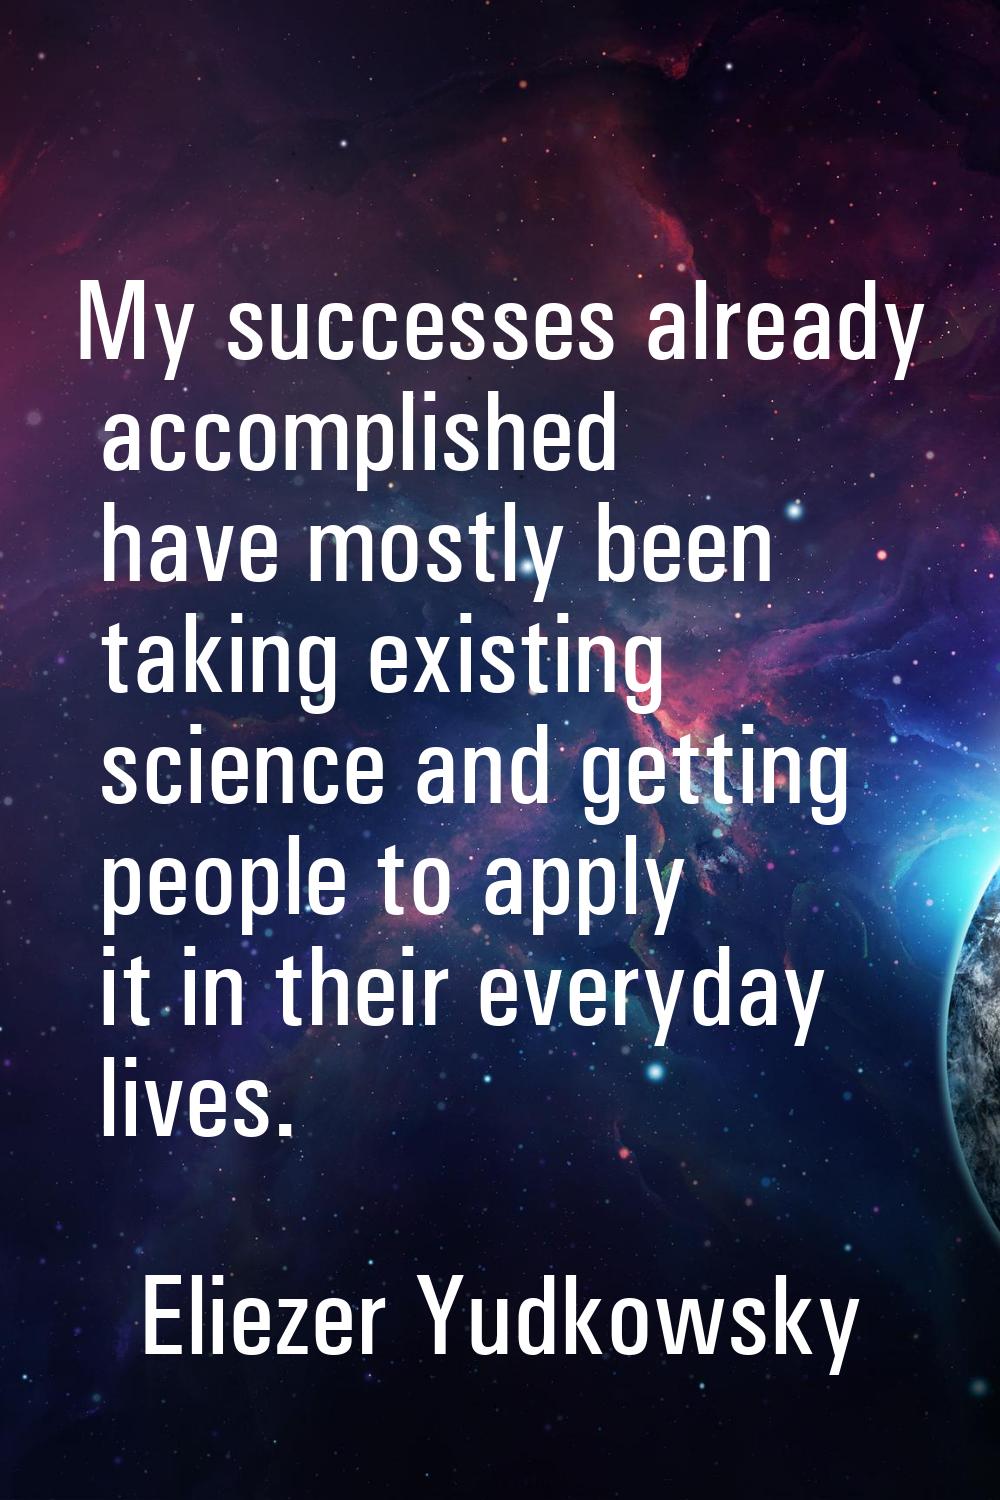 My successes already accomplished have mostly been taking existing science and getting people to ap